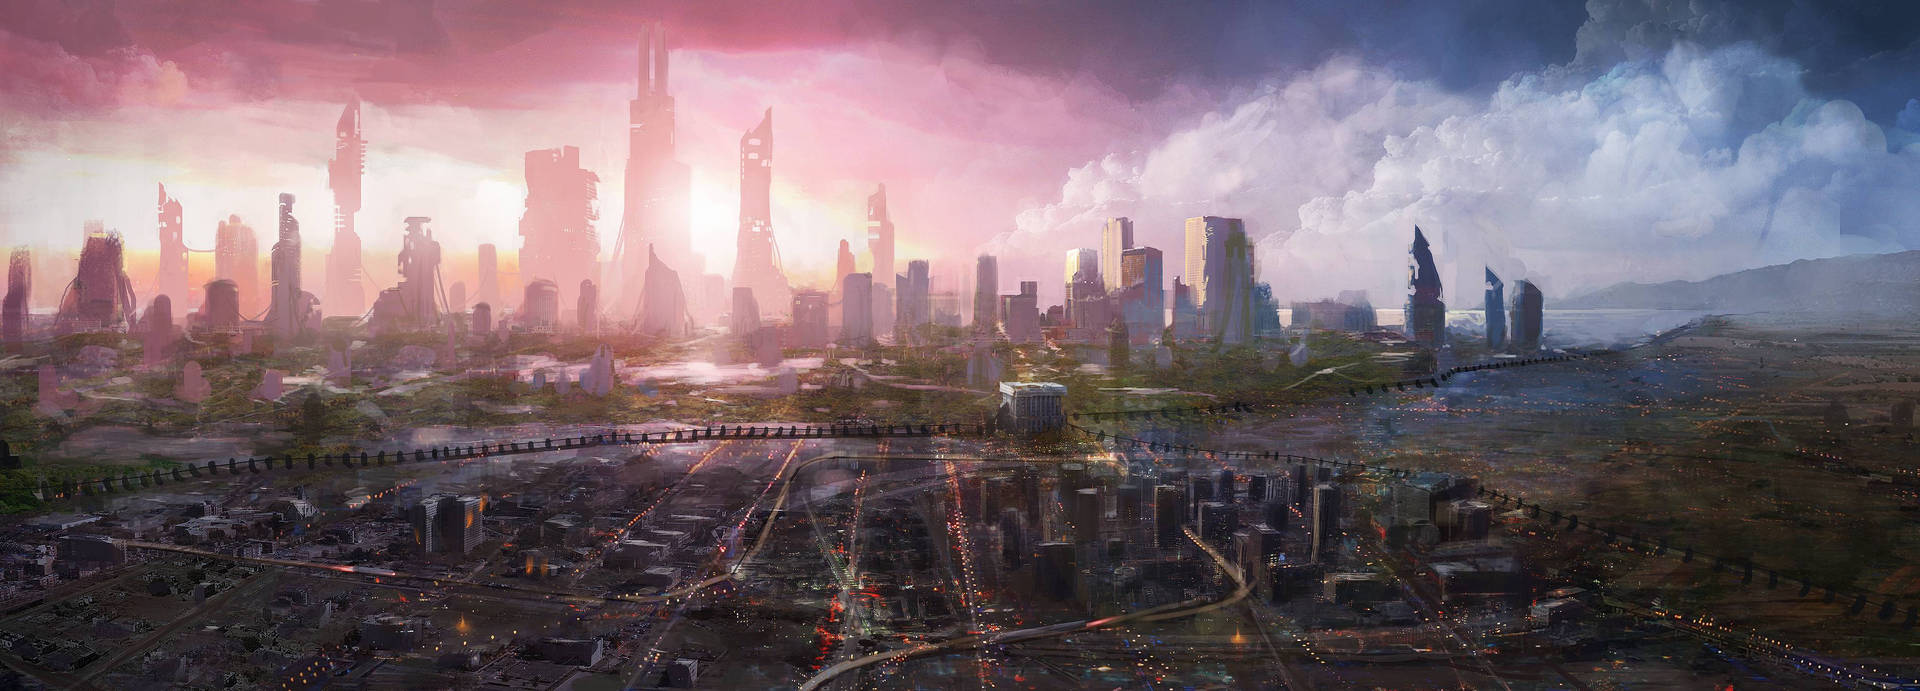 Futuristic City With Pink Sky Background